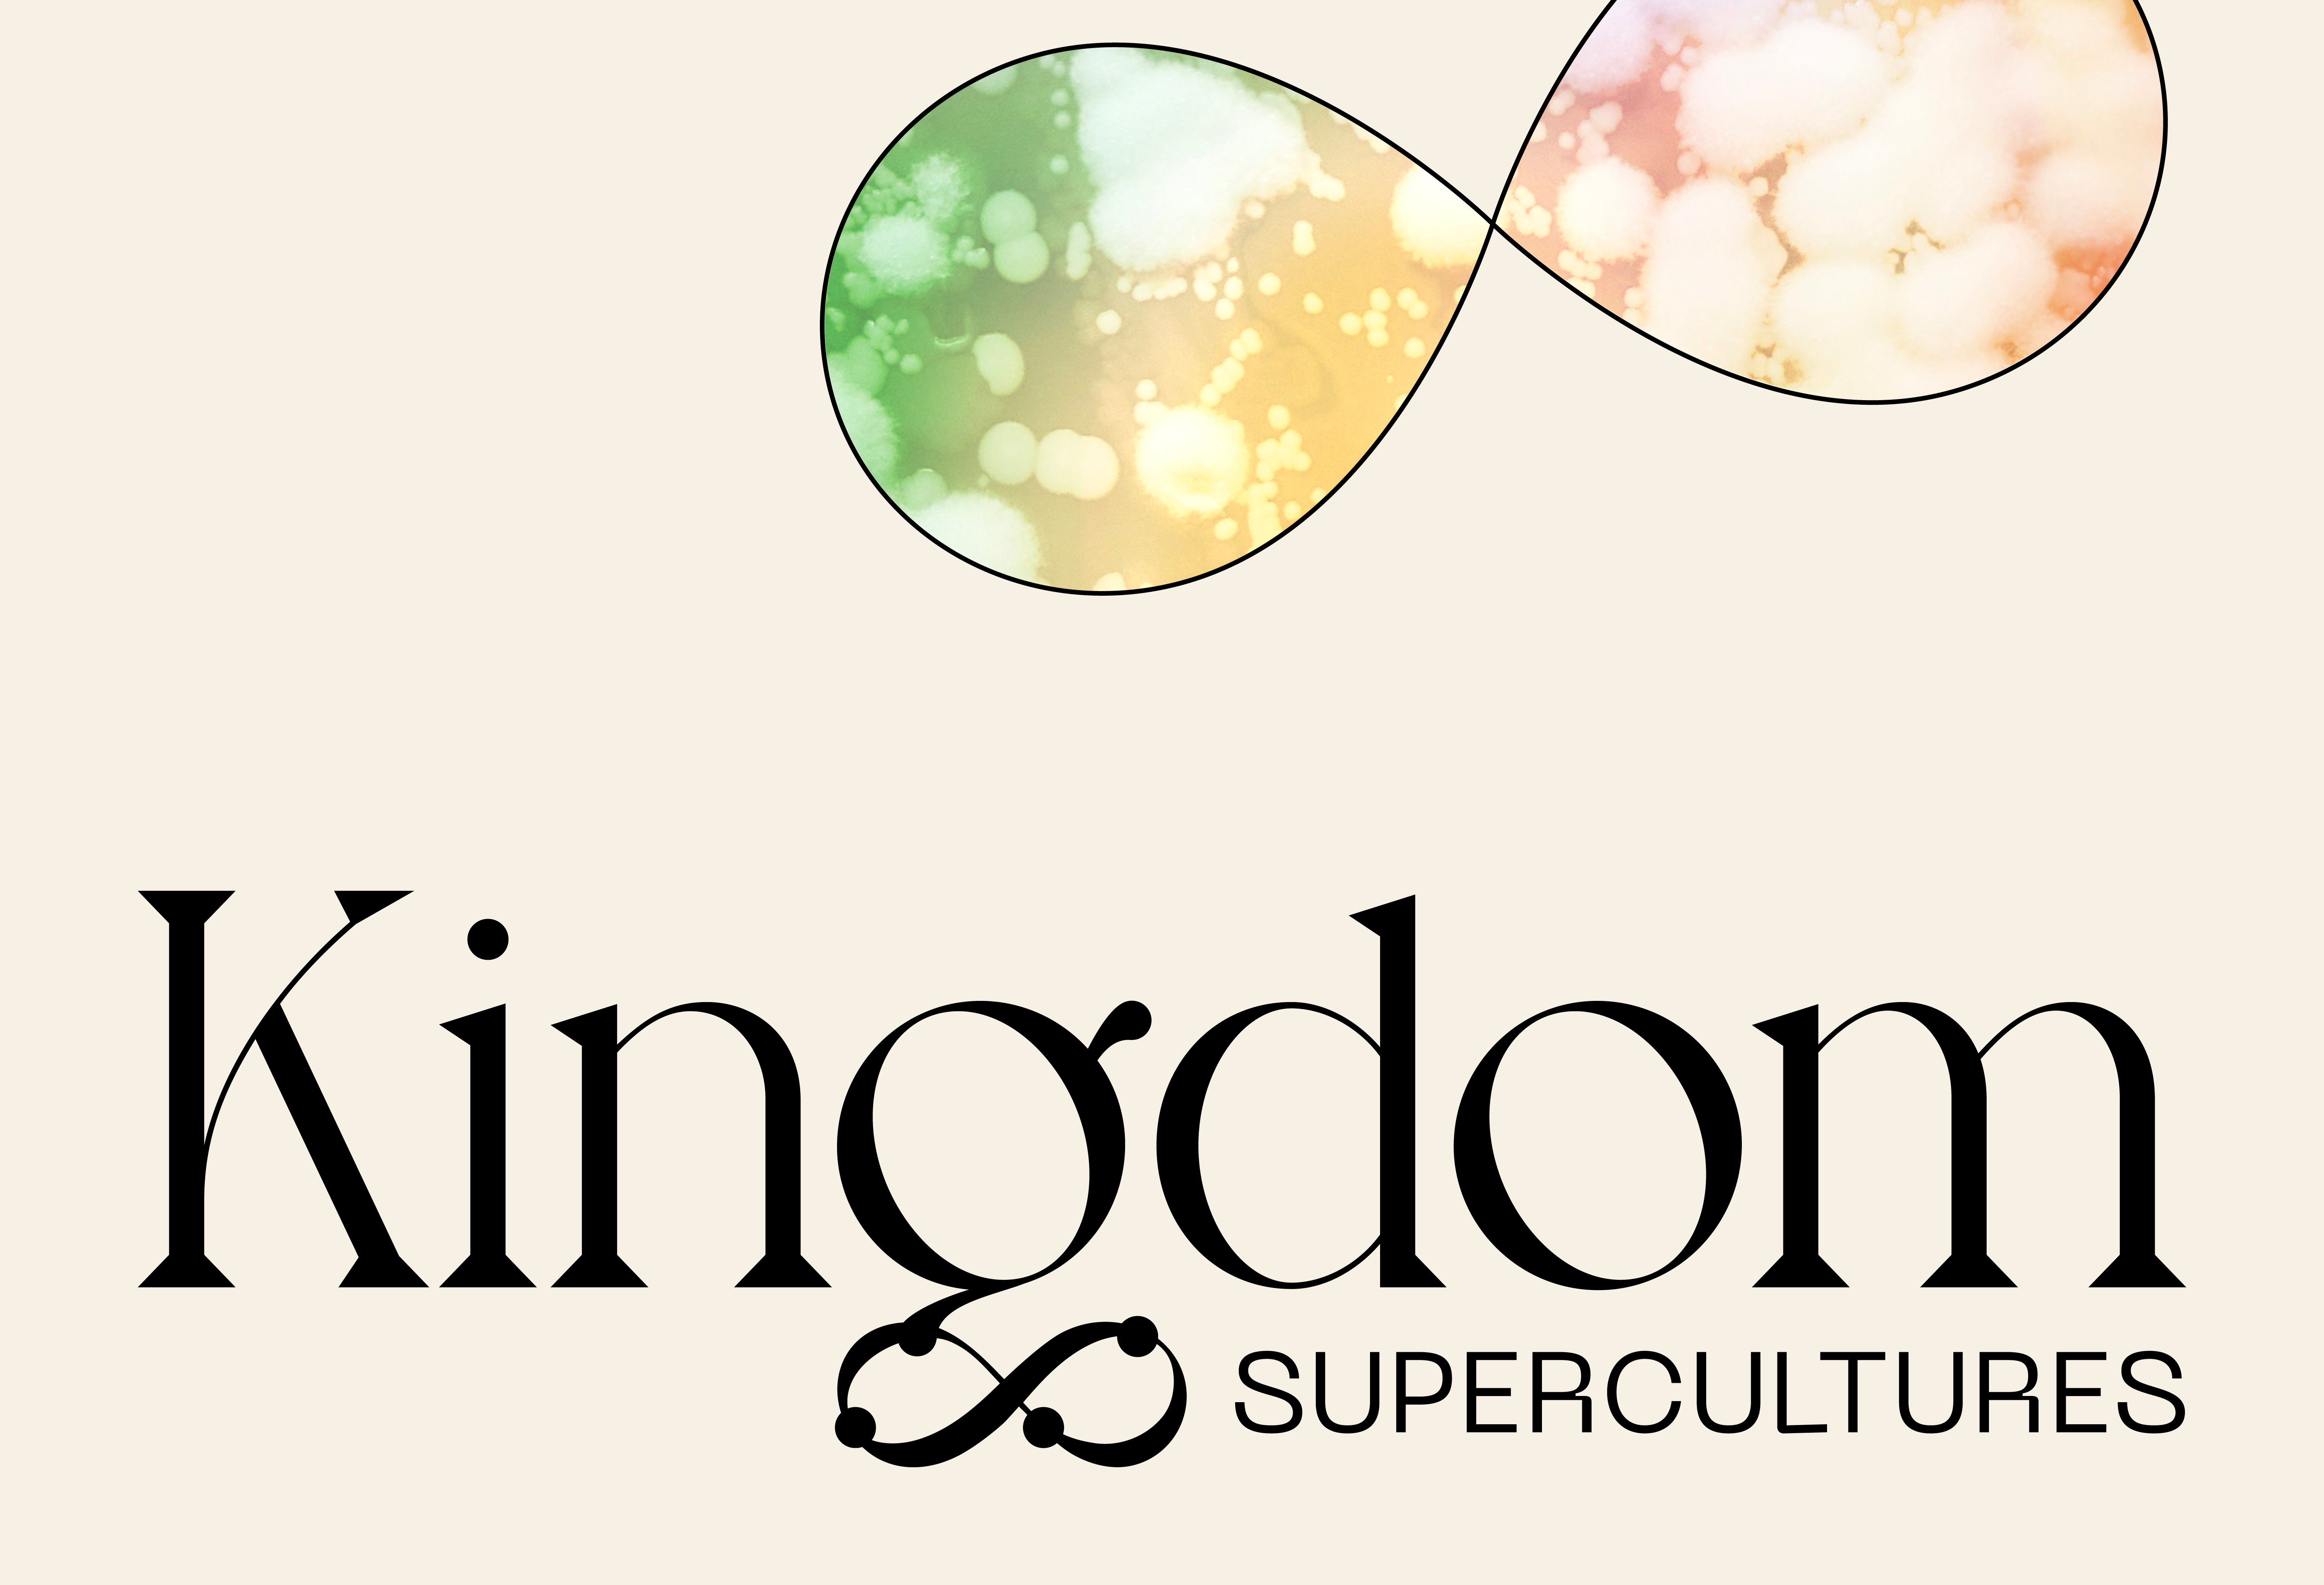 Kingdom Supercultures logo with custom infinity sign graphic, branding by RoAndCo